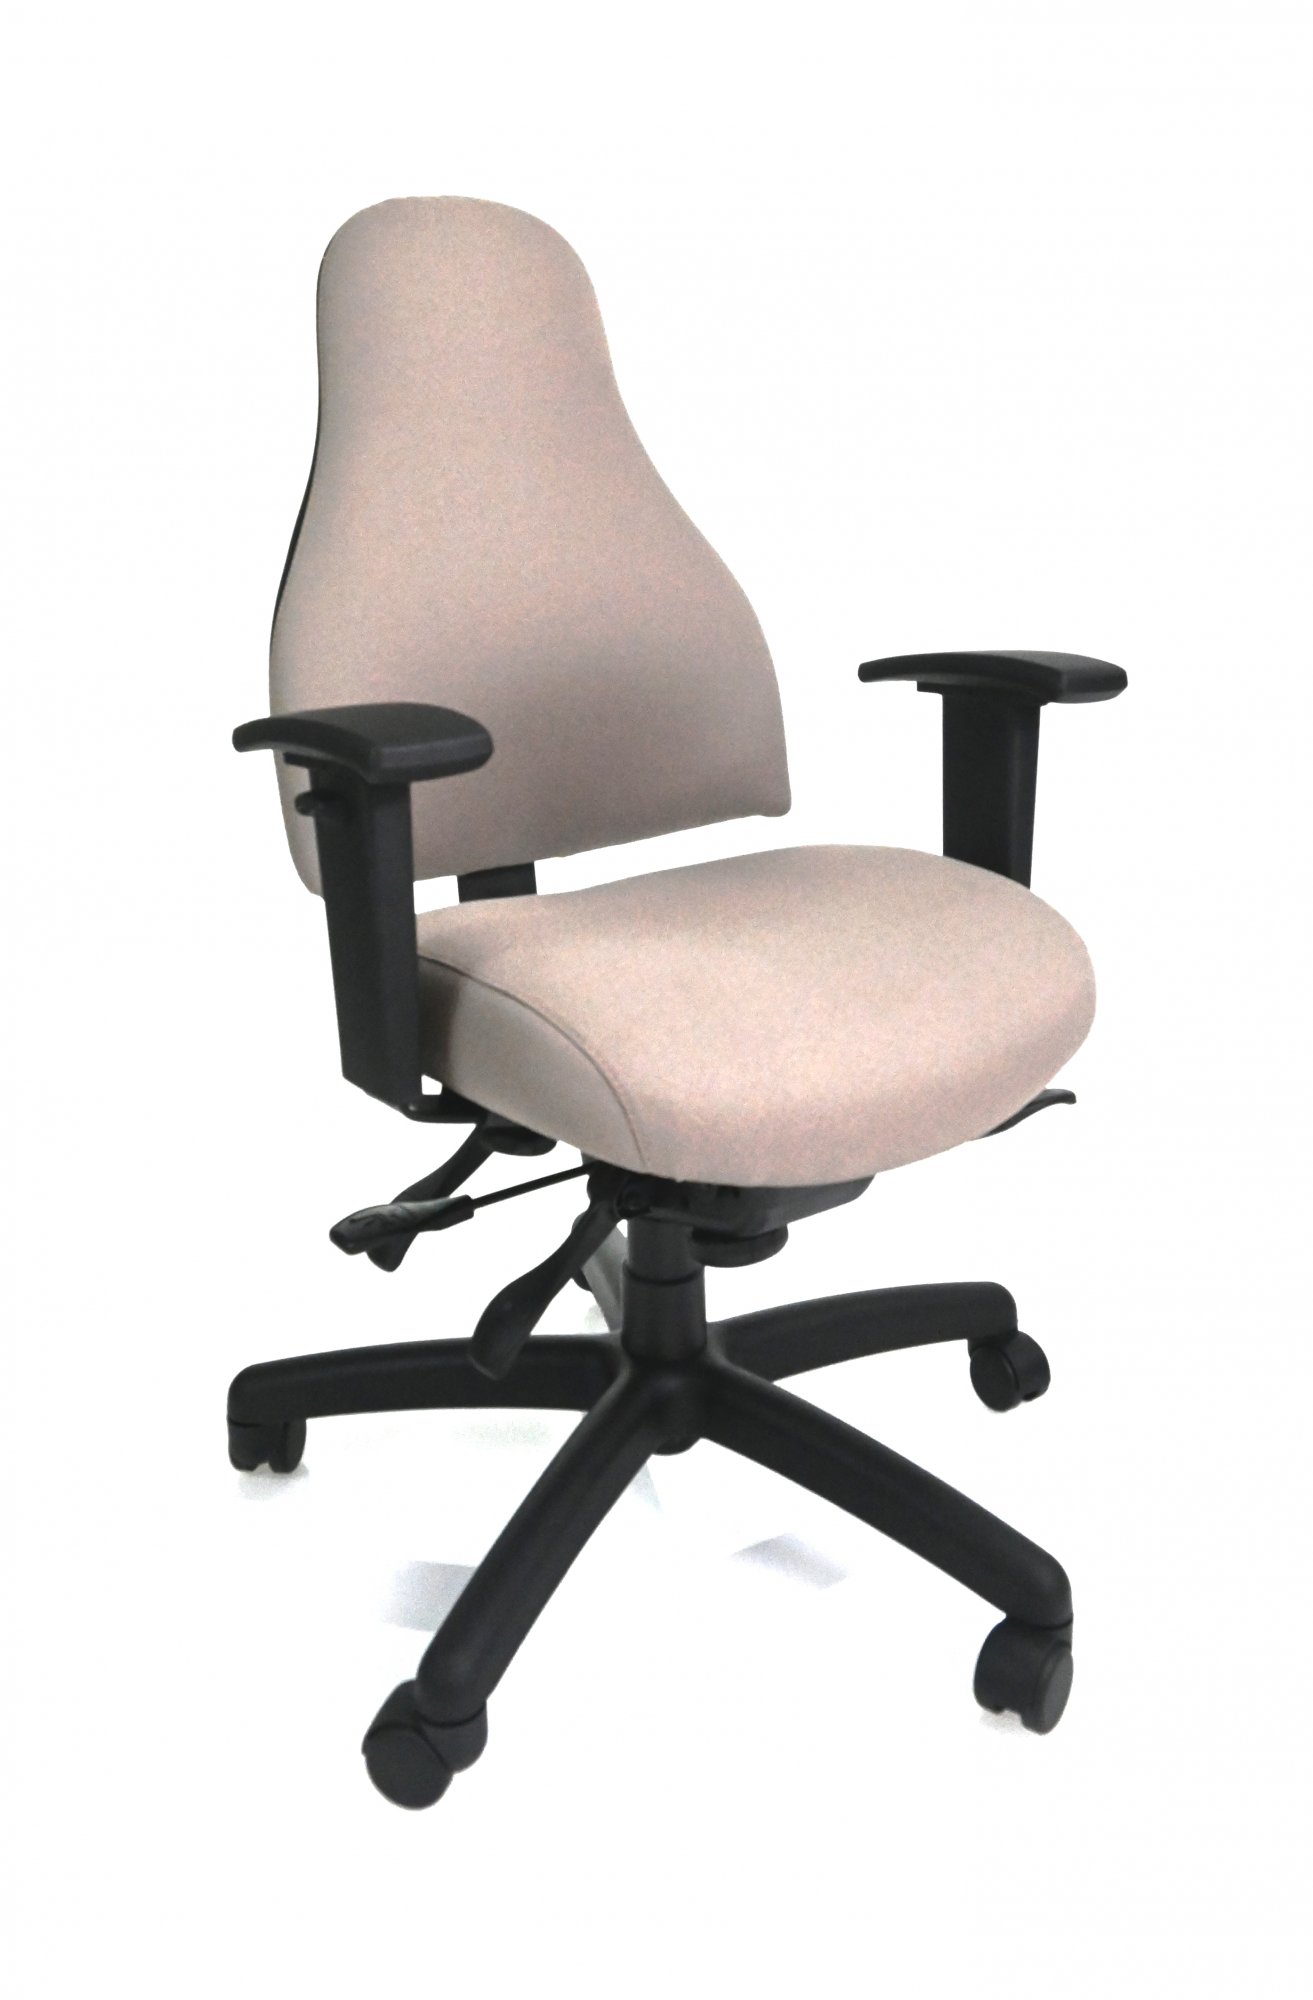 Neutral Posture 6700 Tractor Seat Office Chair